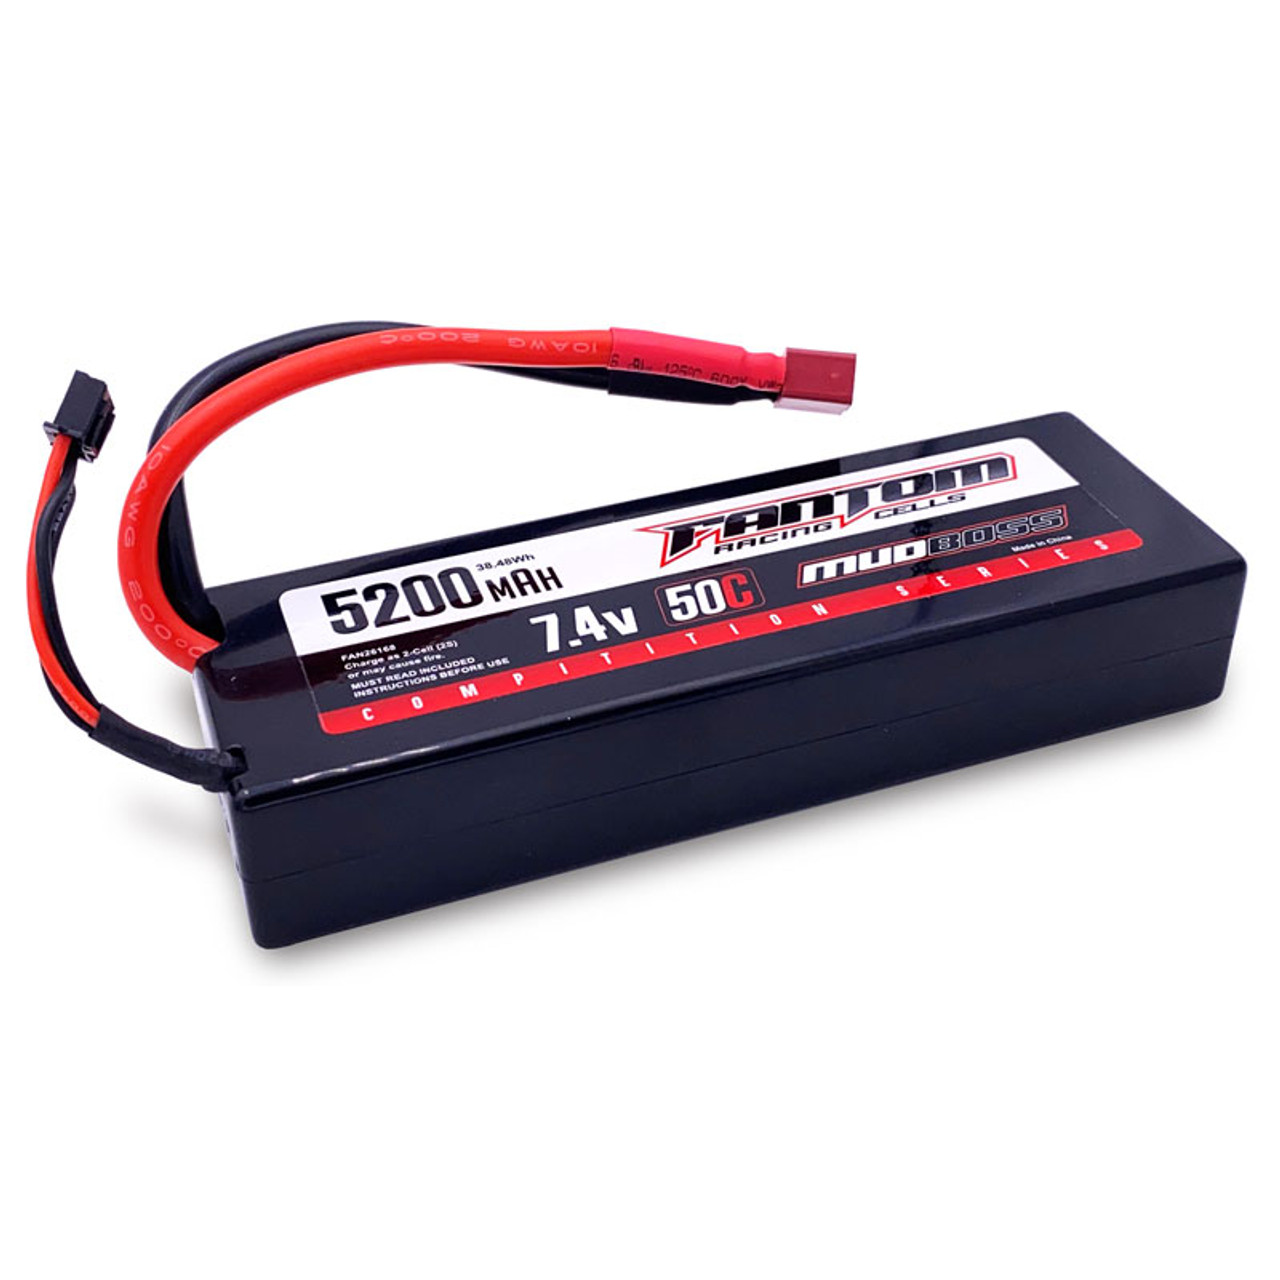 FANTOM 50C MUDBOSS COMPETITION SERIES LiPo – 5200mAh, 7.4v, 2-Cell, Deans Connector FAN26168D